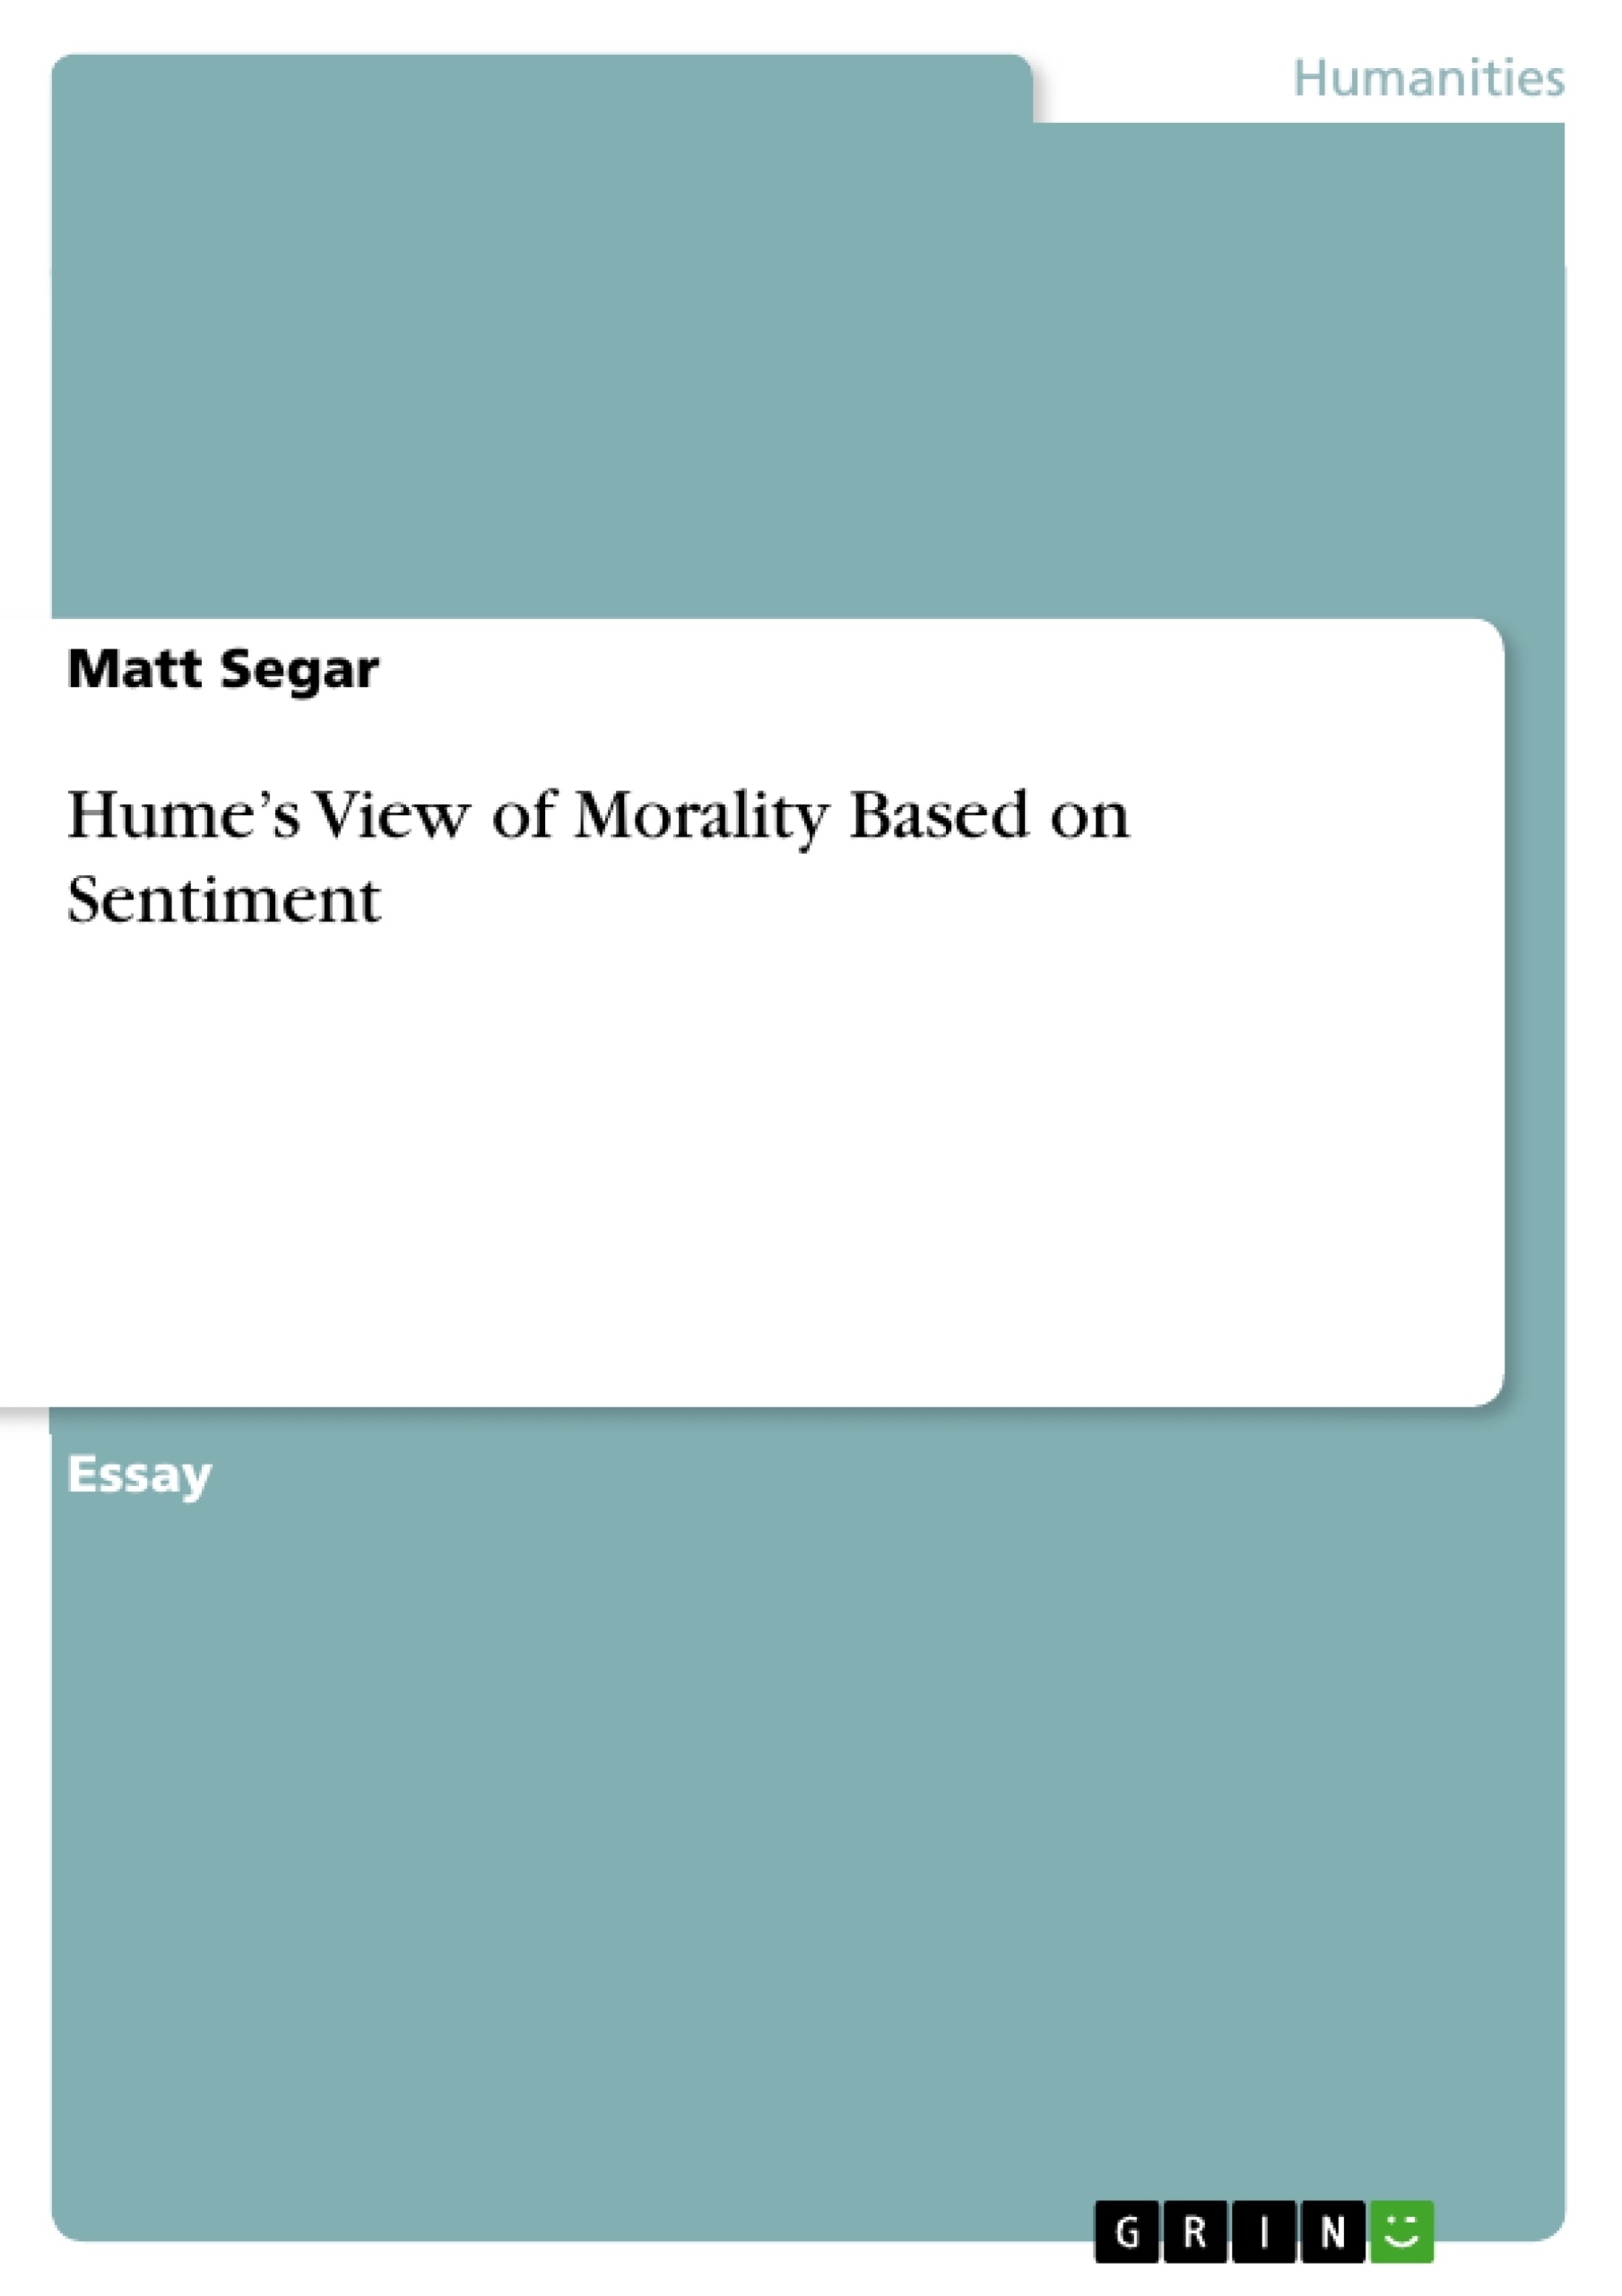 Title: Hume’s View of Morality Based on Sentiment